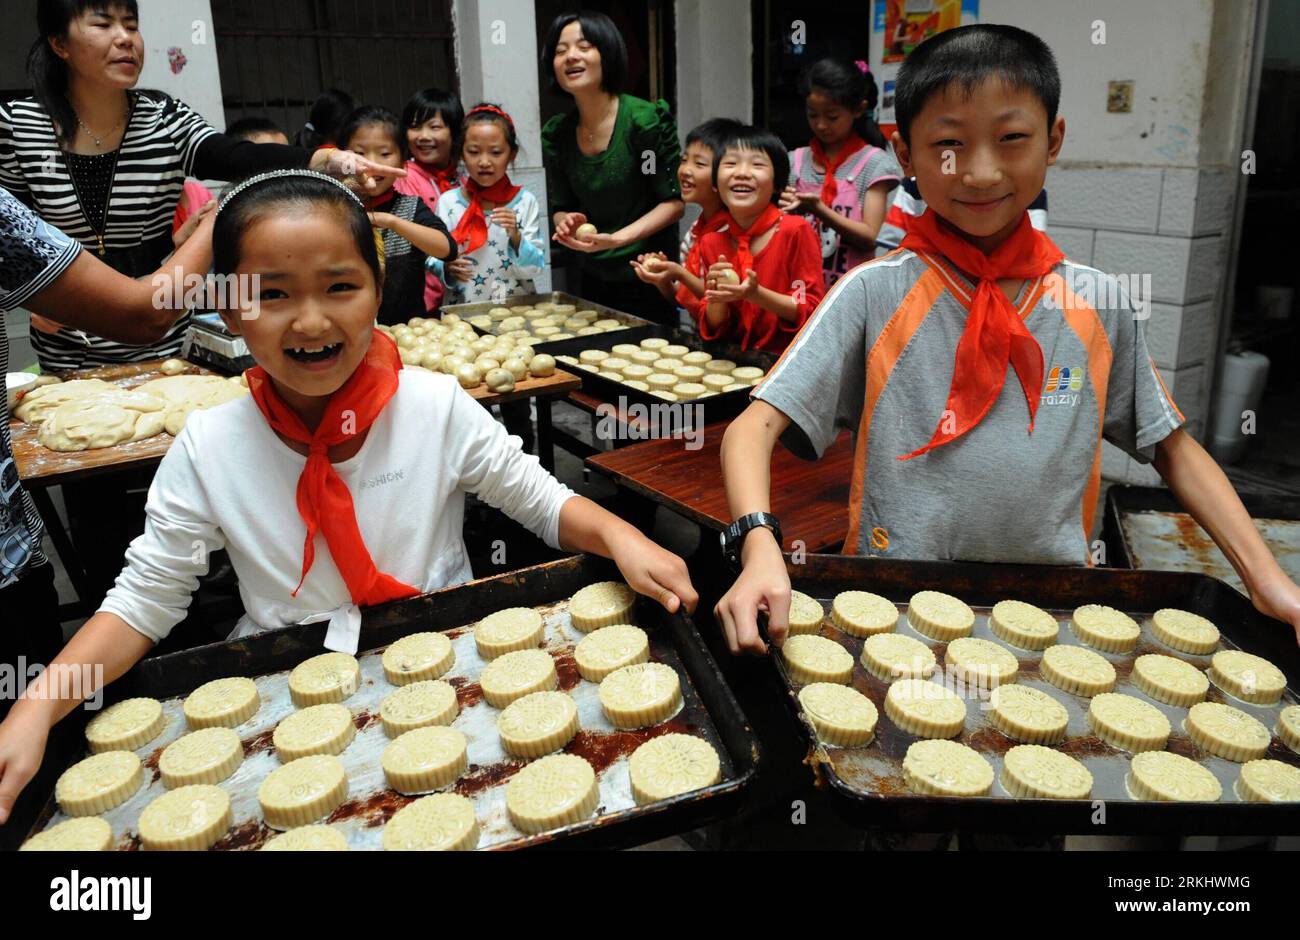 Bildnummer: 55909276  Datum: 07.09.2011  Copyright: imago/Xinhua (110907) -- LIU AN, Sept. 7, 2011 (Xinhua) -- Children of migrant workers from a primary school show the mooncakes they made in Liu an City, east China s Anhui Province, Sept. 7, 2011. As the Mid-Autumn Festival is coming, children in many kindergartens made mooncakes to experience the traditional Chinese culture. (Xinhua/Chen Li) (zgp) #CHINA-ANHUI-CHILDREN-MOONCAKE (CN) PUBLICATIONxNOTxINxCHN Gesellschaft Mondkuchen Zubereitung Backen Auswanderer Kind Schüler Grundschule x0x xtm 2011 quer      55909276 Date 07 09 2011 Copyright Stock Photo